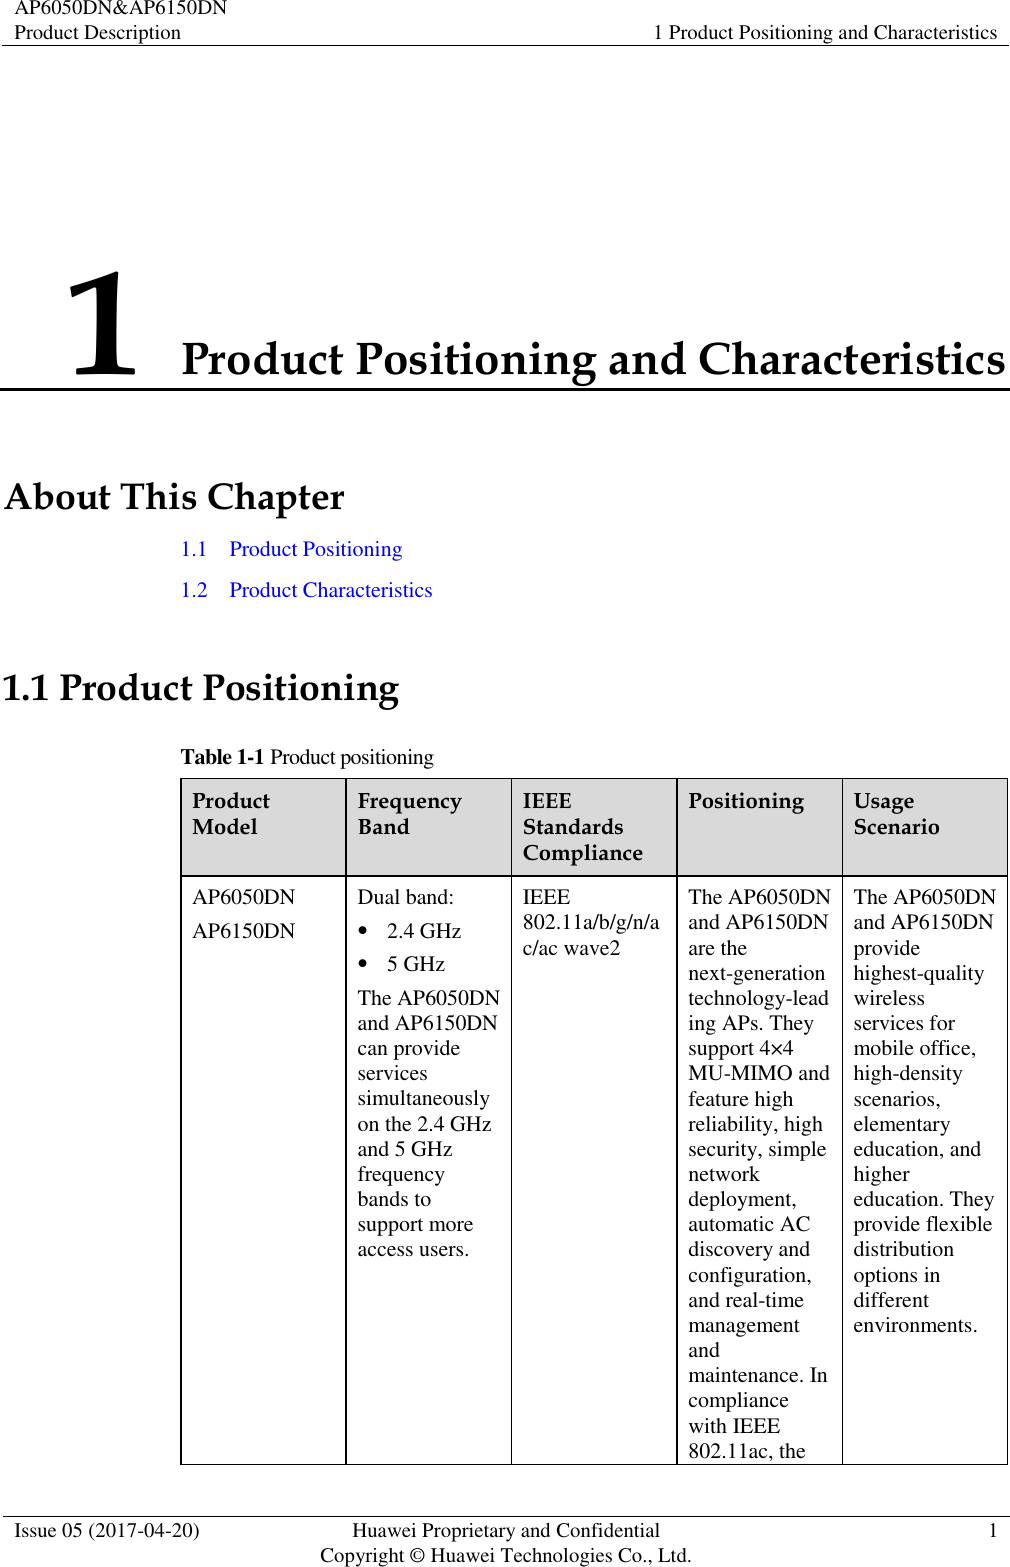 AP6050DN&amp;AP6150DN Product Description 1 Product Positioning and Characteristics  Issue 05 (2017-04-20) Huawei Proprietary and Confidential                                     Copyright © Huawei Technologies Co., Ltd. 1  1 Product Positioning and Characteristics About This Chapter 1.1    Product Positioning 1.2    Product Characteristics 1.1 Product Positioning Table 1-1 Product positioning Product Model Frequency Band IEEE Standards Compliance Positioning Usage Scenario AP6050DN AP6150DN Dual band:  2.4 GHz  5 GHz The AP6050DN and AP6150DN can provide services simultaneously on the 2.4 GHz and 5 GHz frequency bands to support more access users. IEEE 802.11a/b/g/n/ac/ac wave2 The AP6050DN and AP6150DN are the next-generation technology-leading APs. They support 4×4 MU-MIMO and feature high reliability, high security, simple network deployment, automatic AC discovery and configuration, and real-time management and maintenance. In compliance with IEEE 802.11ac, the The AP6050DN and AP6150DN provide highest-quality wireless services for mobile office, high-density scenarios, elementary education, and higher education. They provide flexible distribution options in different environments. 